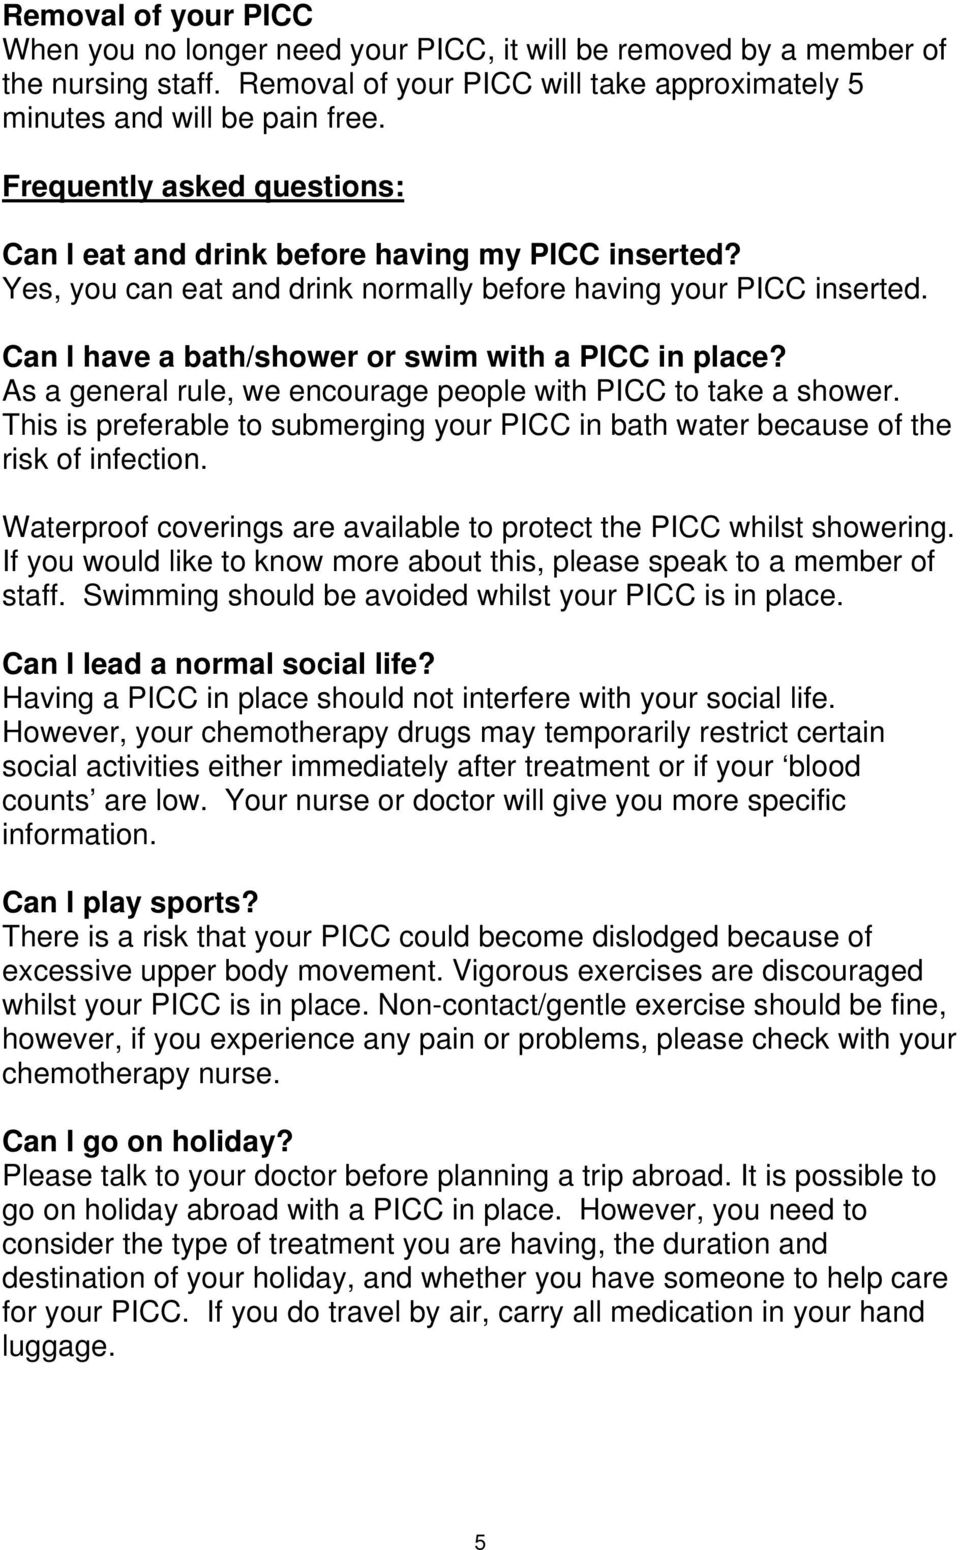 Can I have a bath/shower or swim with a PICC in place? As a general rule, we encourage people with PICC to take a shower.